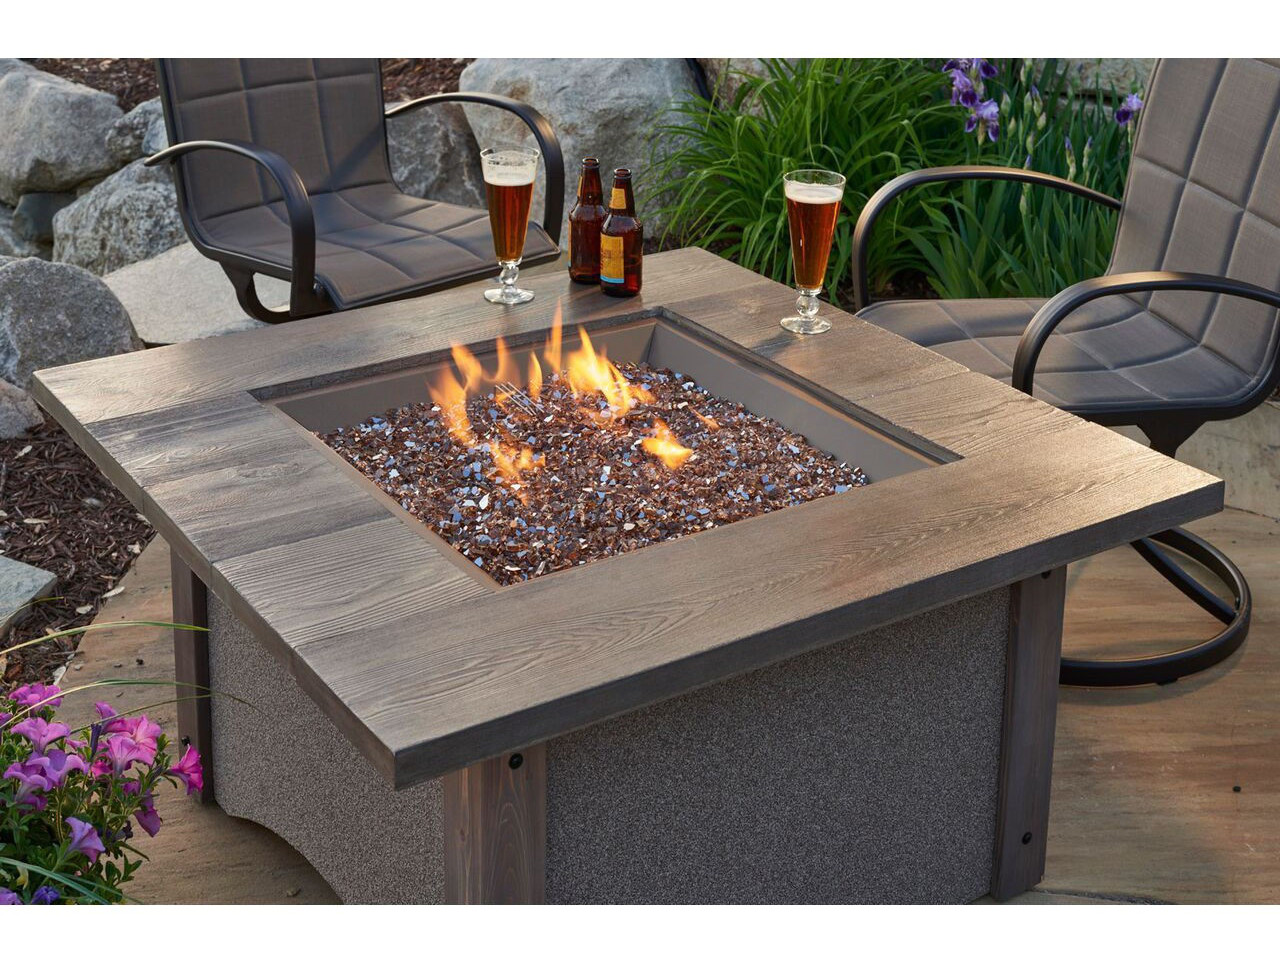 Firepit Patio Table
 Outdoor GreatRoom Pine Ridge Square Fire Pit Table with